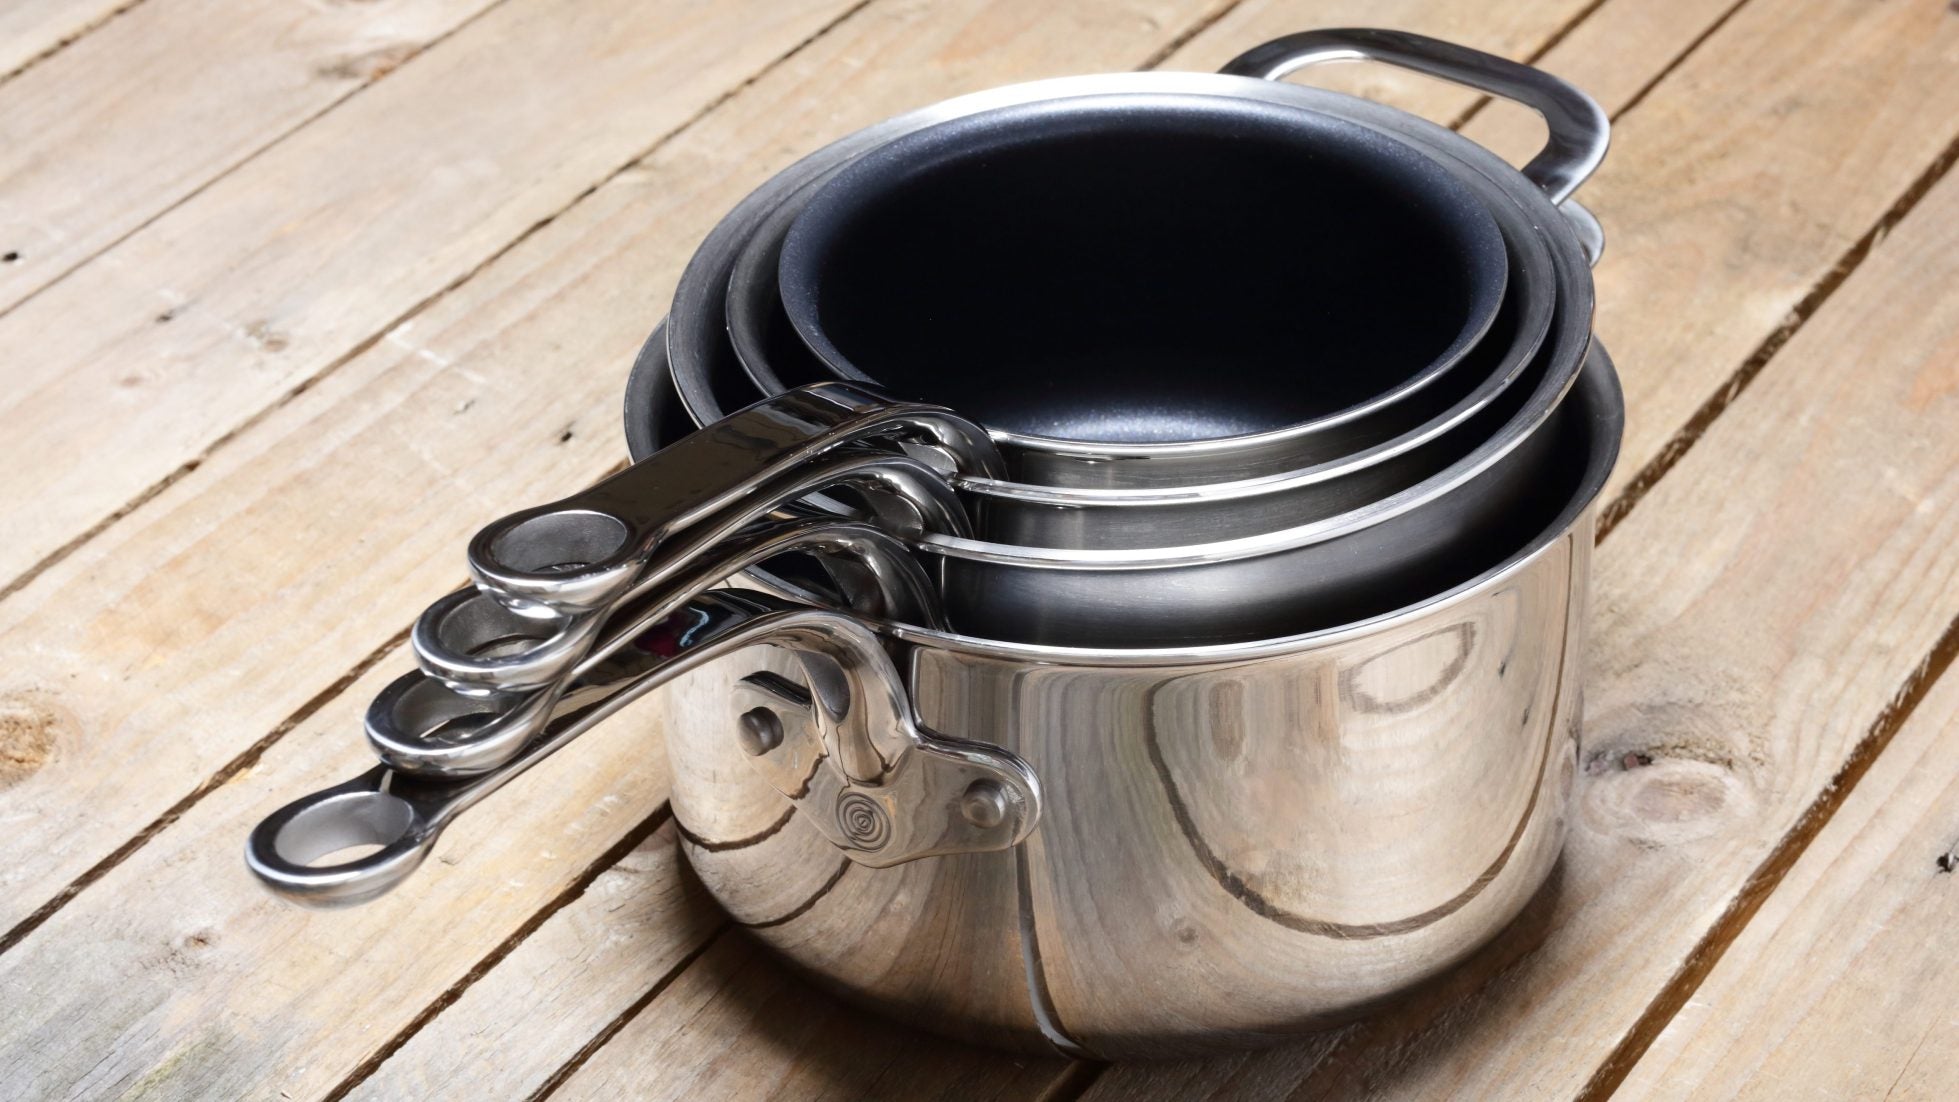 ProWare Stainless Steel Tri-Ply saucepans efficiently nest